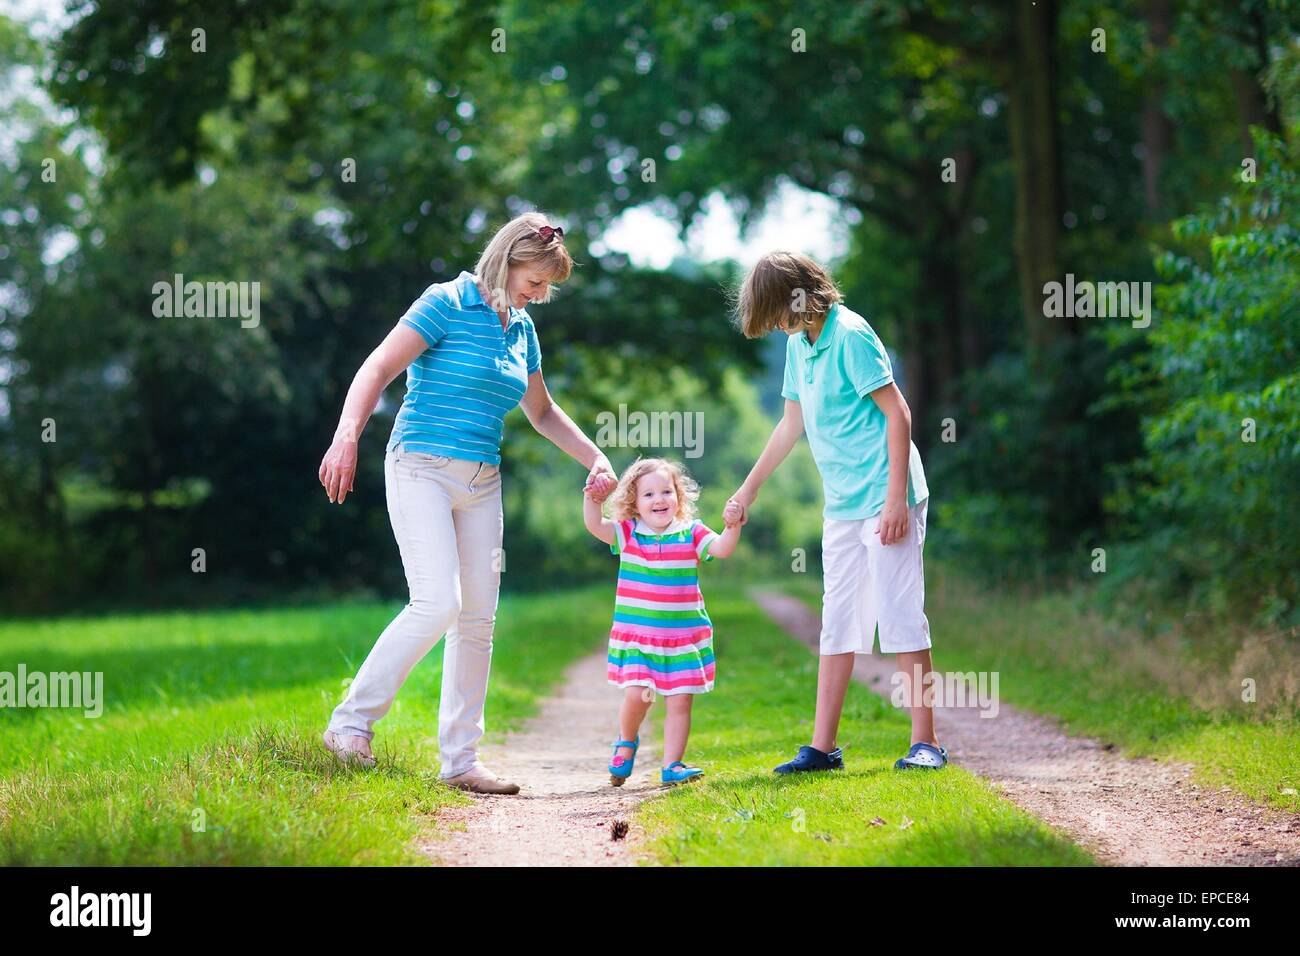 Happy active woman enjoying hiking with two children, school age boy and cute curly toddler girl walking together Stock Photo